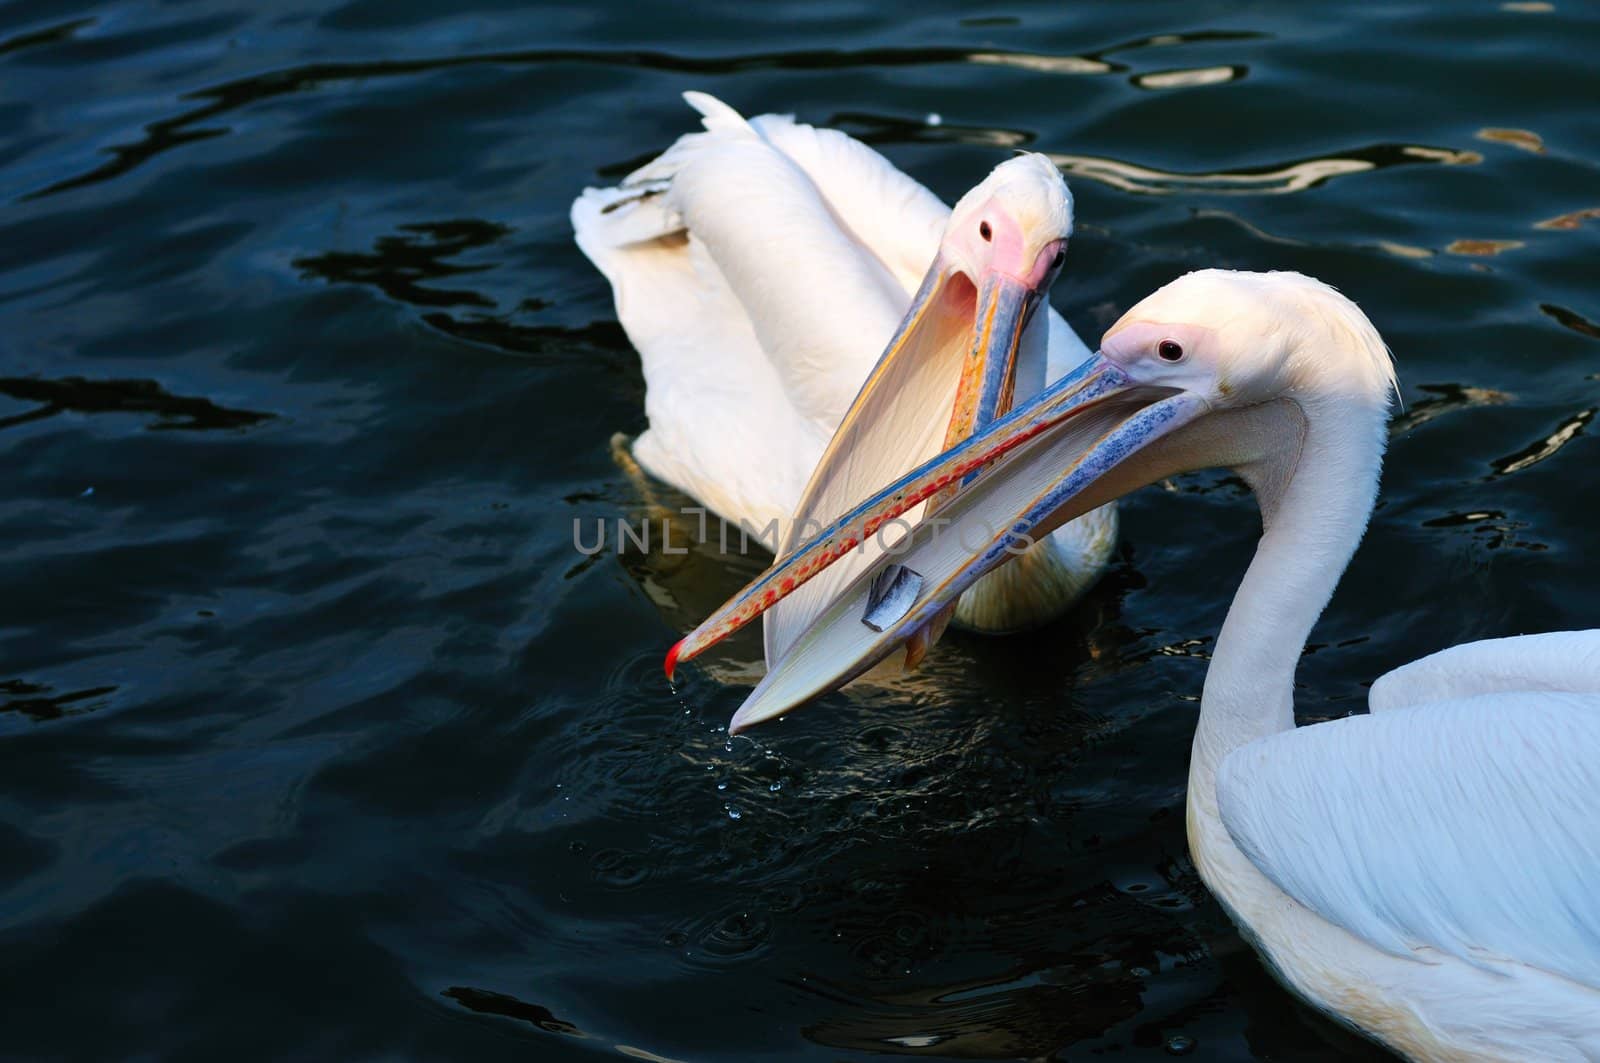 Two pelicans scramble for food in the lake